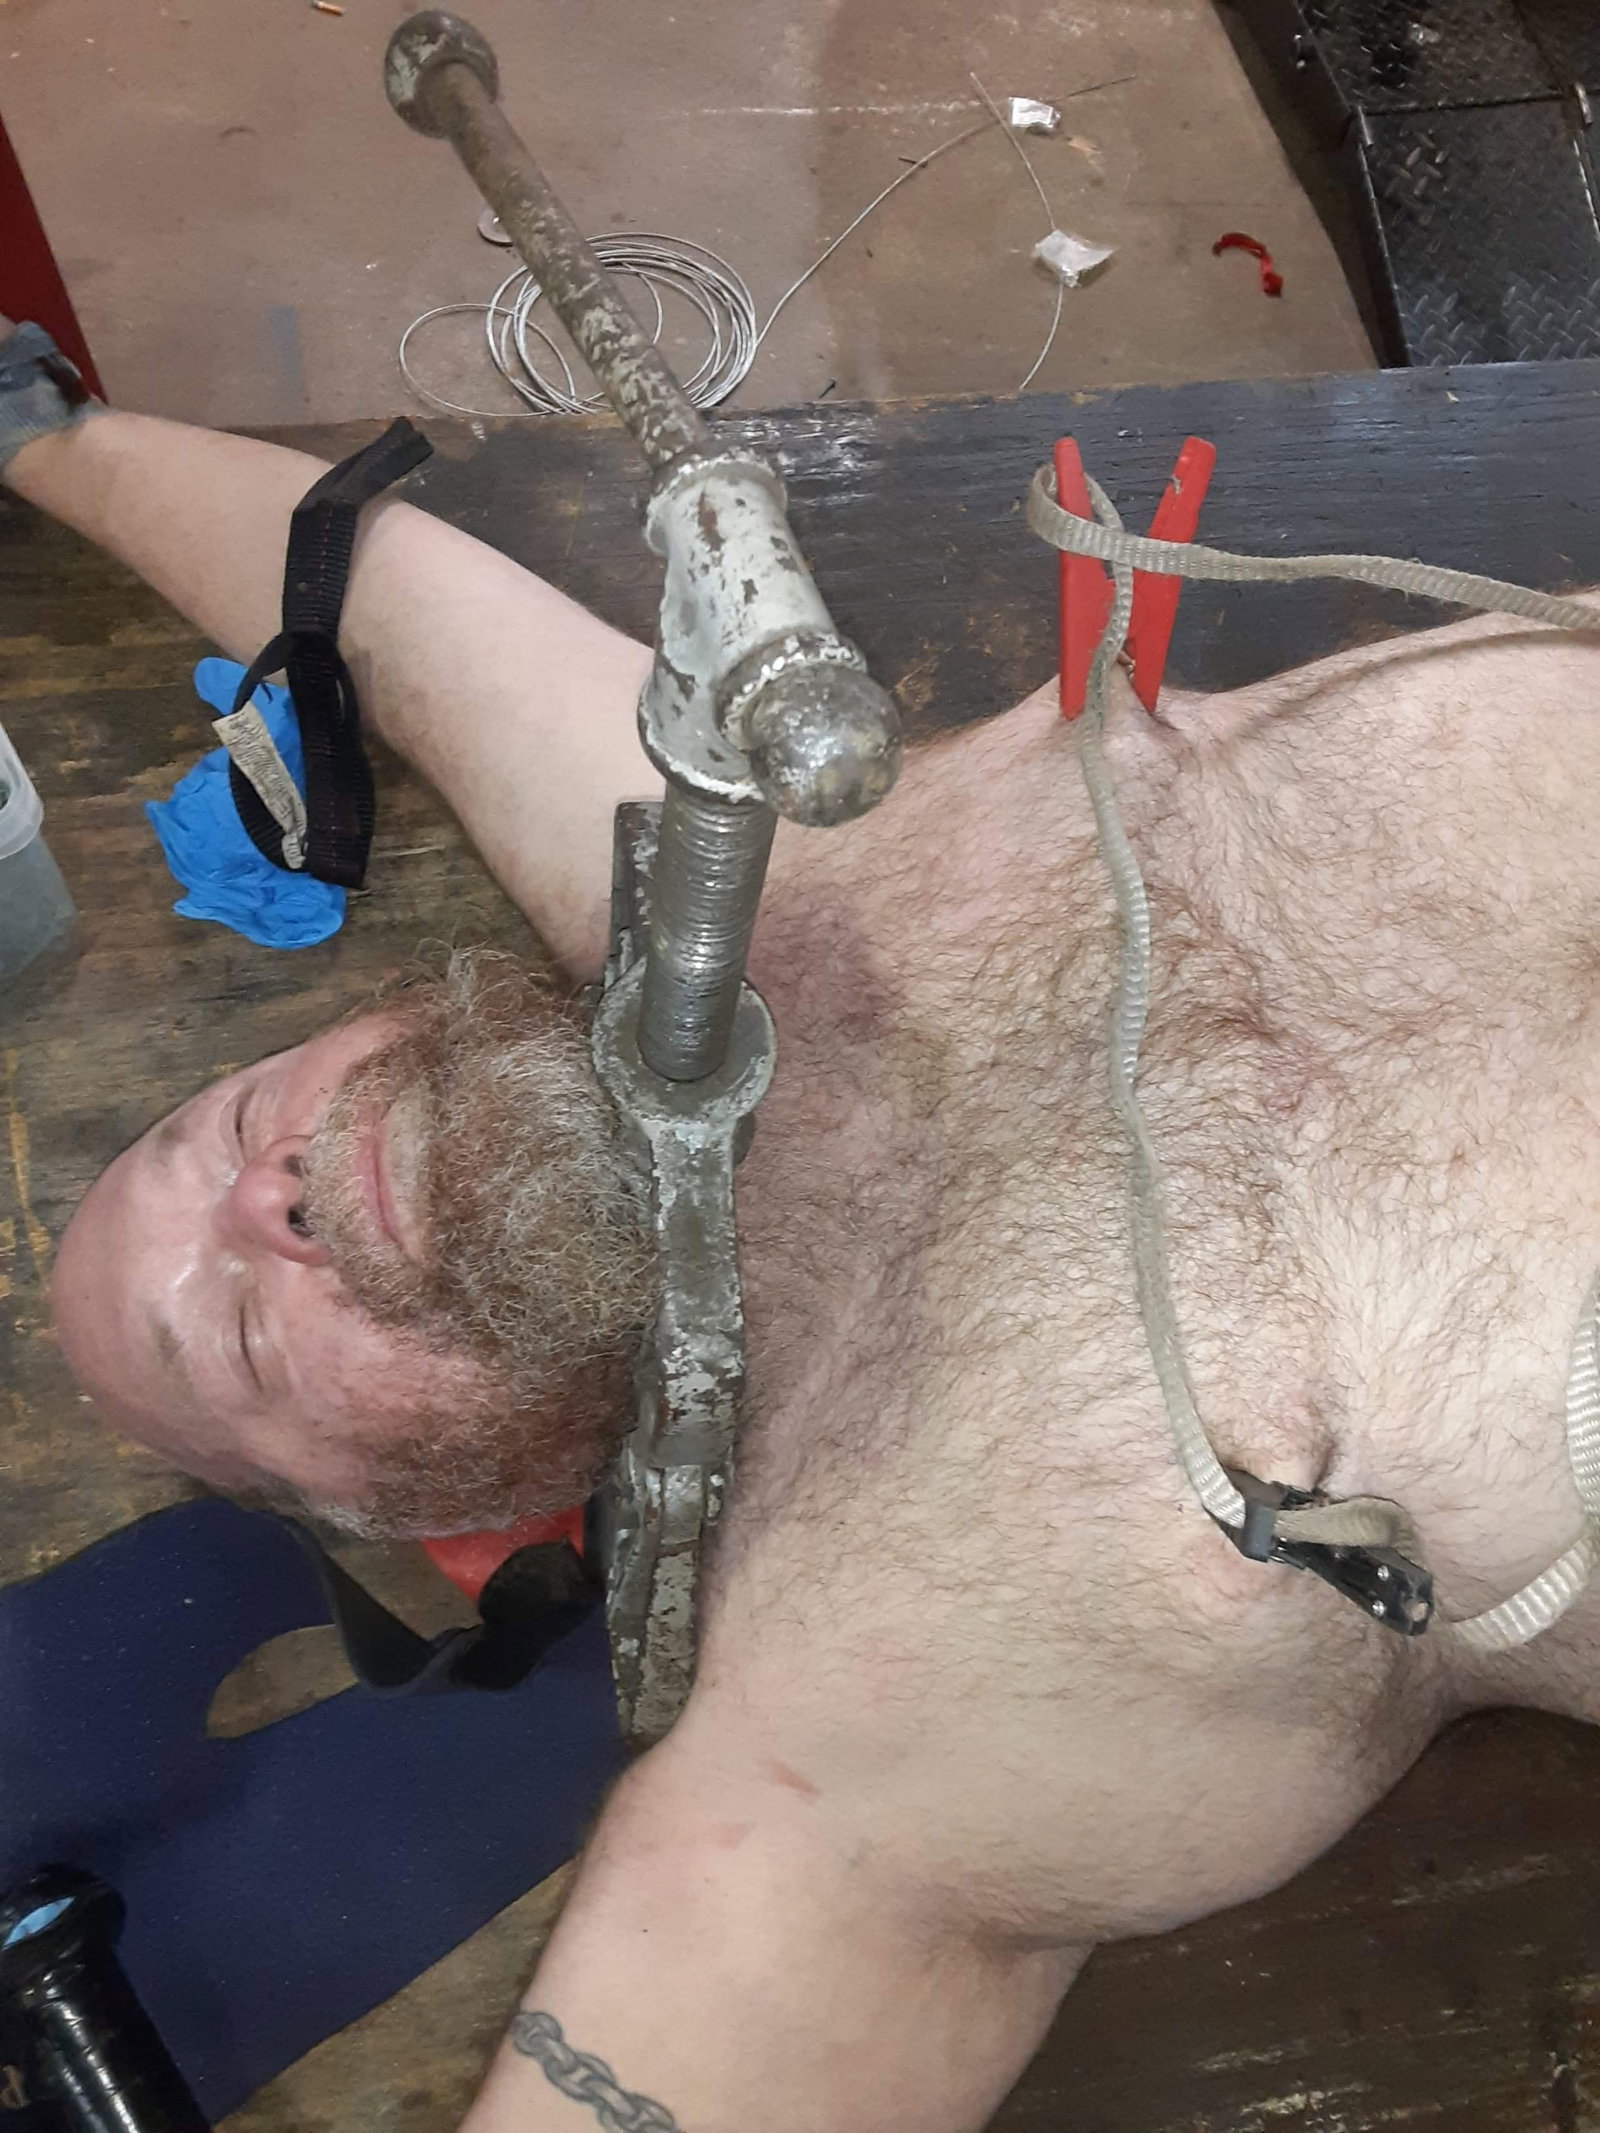 Photo by DeviantDuane2 with the username @DeviantDuane2,  January 14, 2020 at 7:37 PM. The post is about the topic Very risky self-bondage